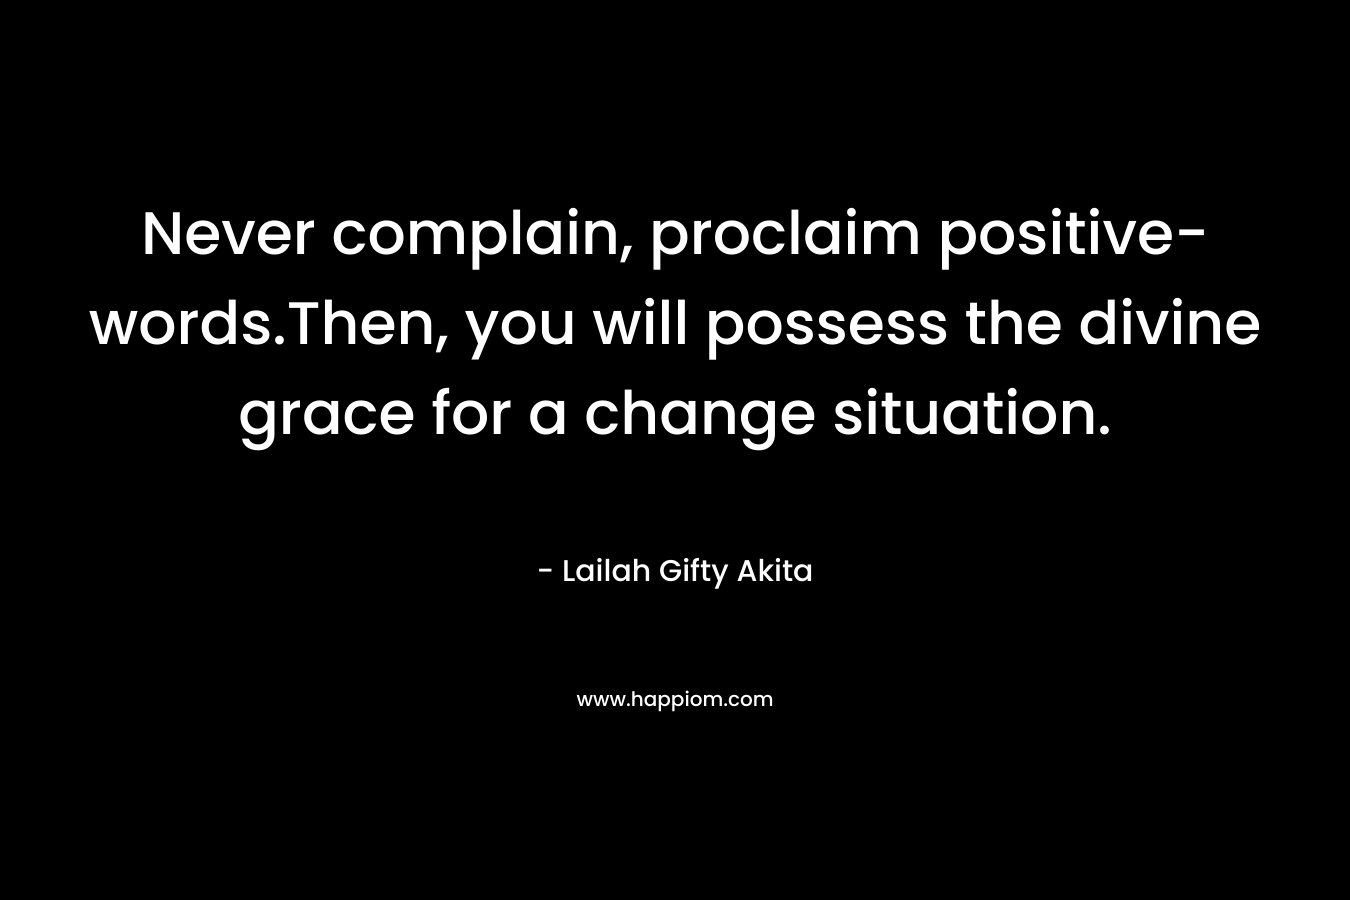 Never complain, proclaim positive-words.Then, you will possess the divine grace for a change situation. – Lailah Gifty Akita